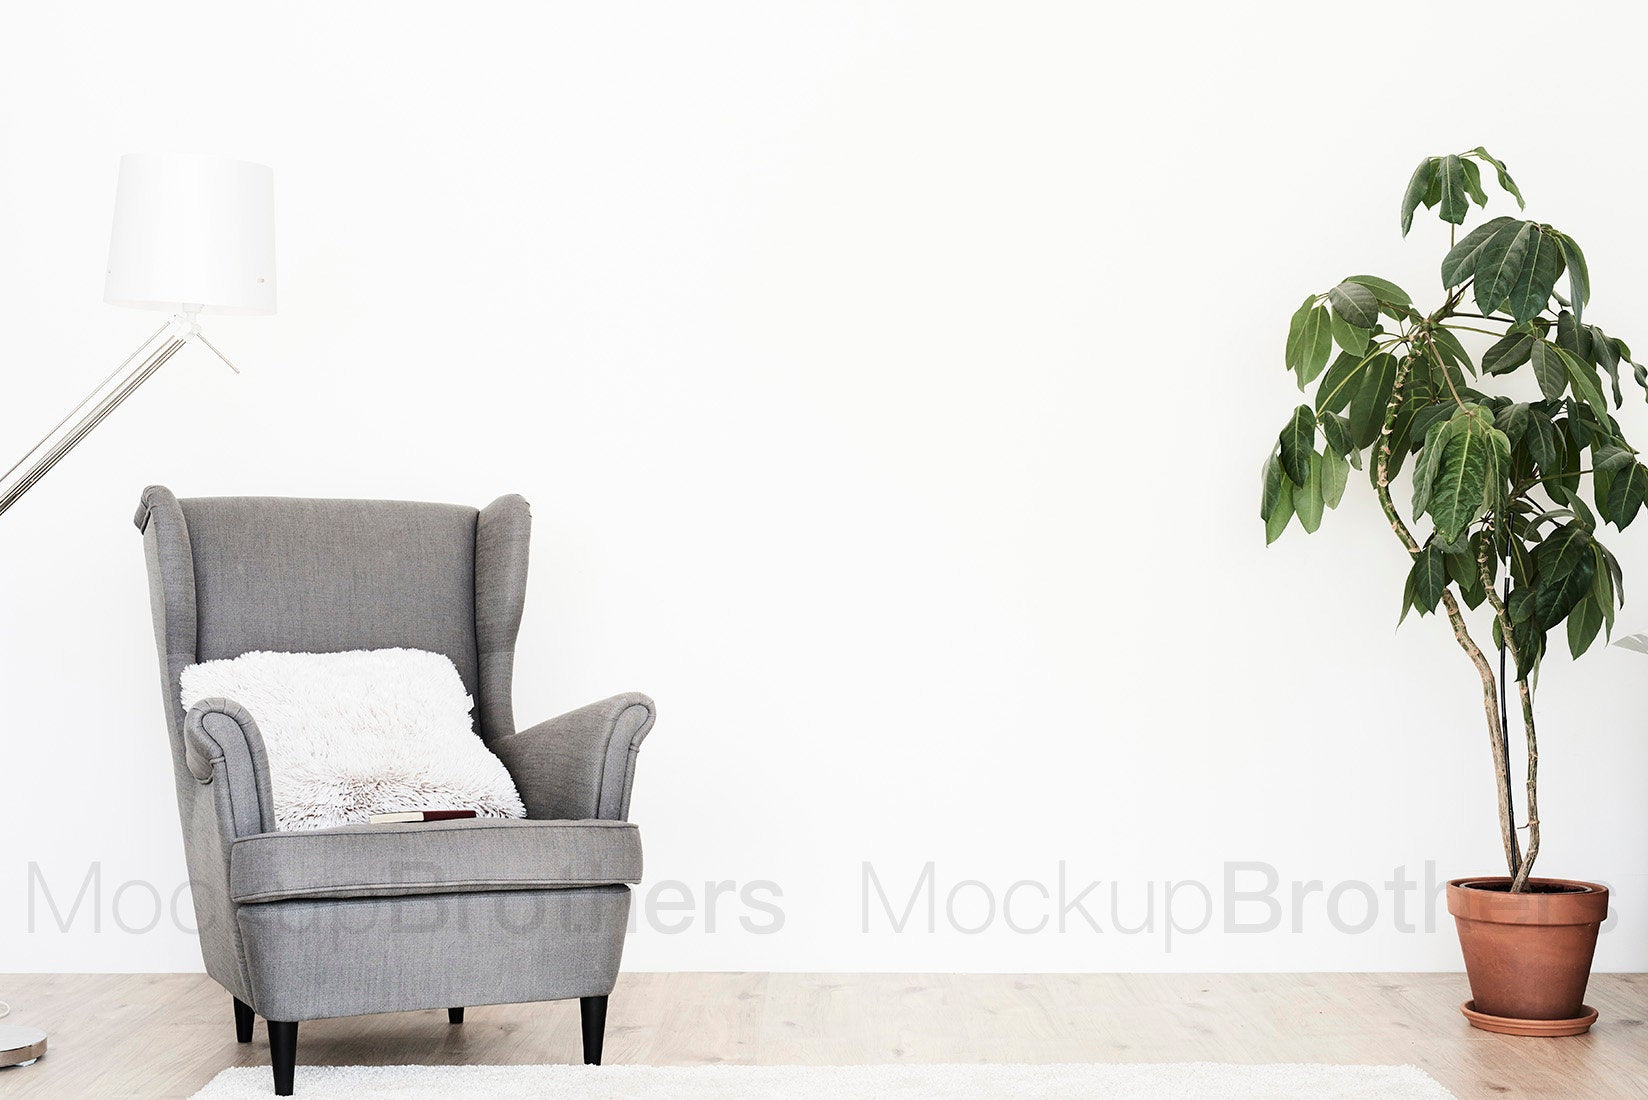 Interior stock photo with sofa by Mockup Brothers